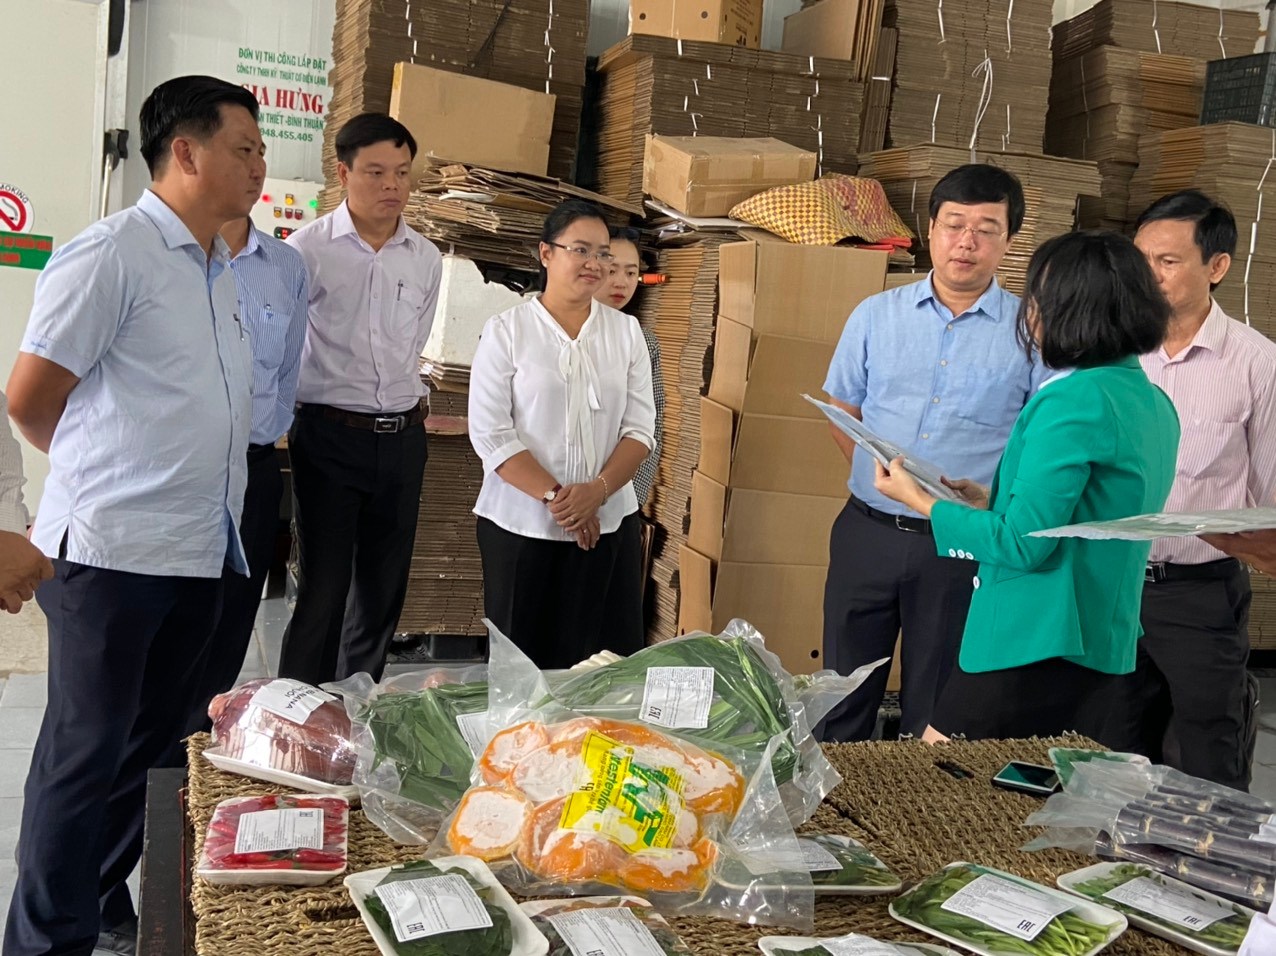 western-farm-welcomed-the-delegation-of-dong-thap-provincial-people's-committee,-shared-about-the-situation-of-agricultural-exports-amid-the-covid-19-pandemic